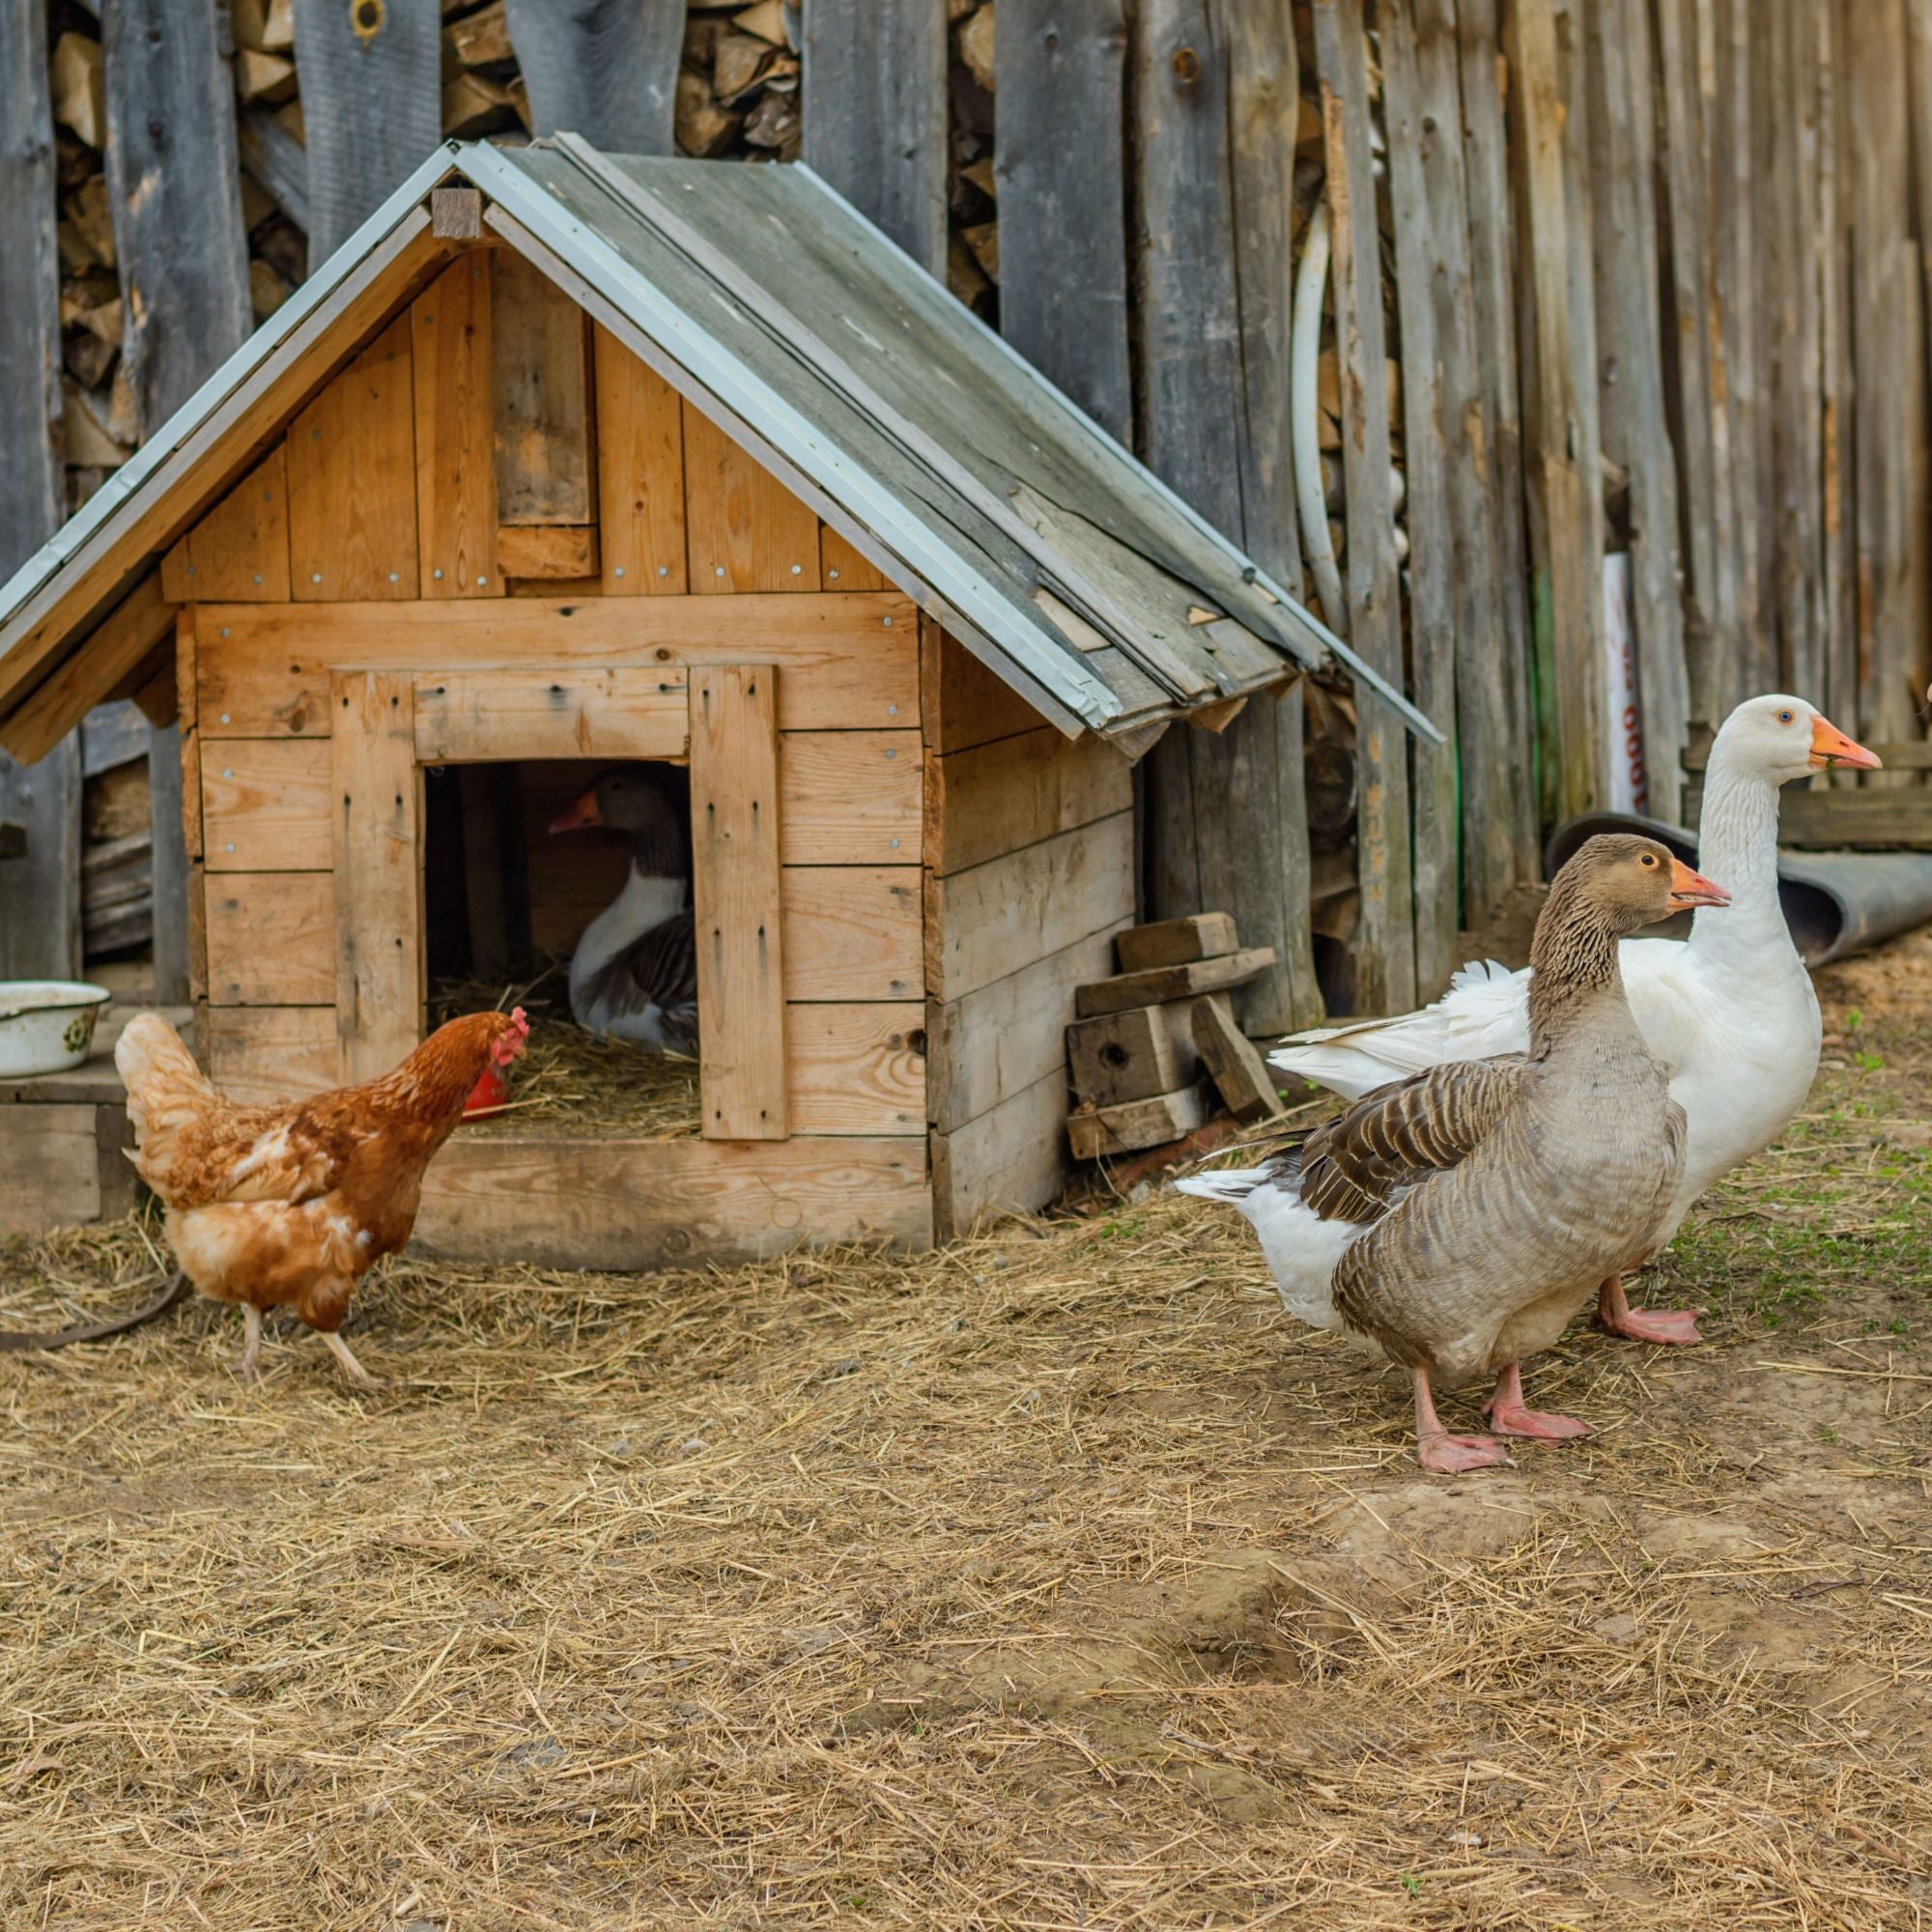 Yes, ducks, geese, and chickens generally do get along well with each other. 